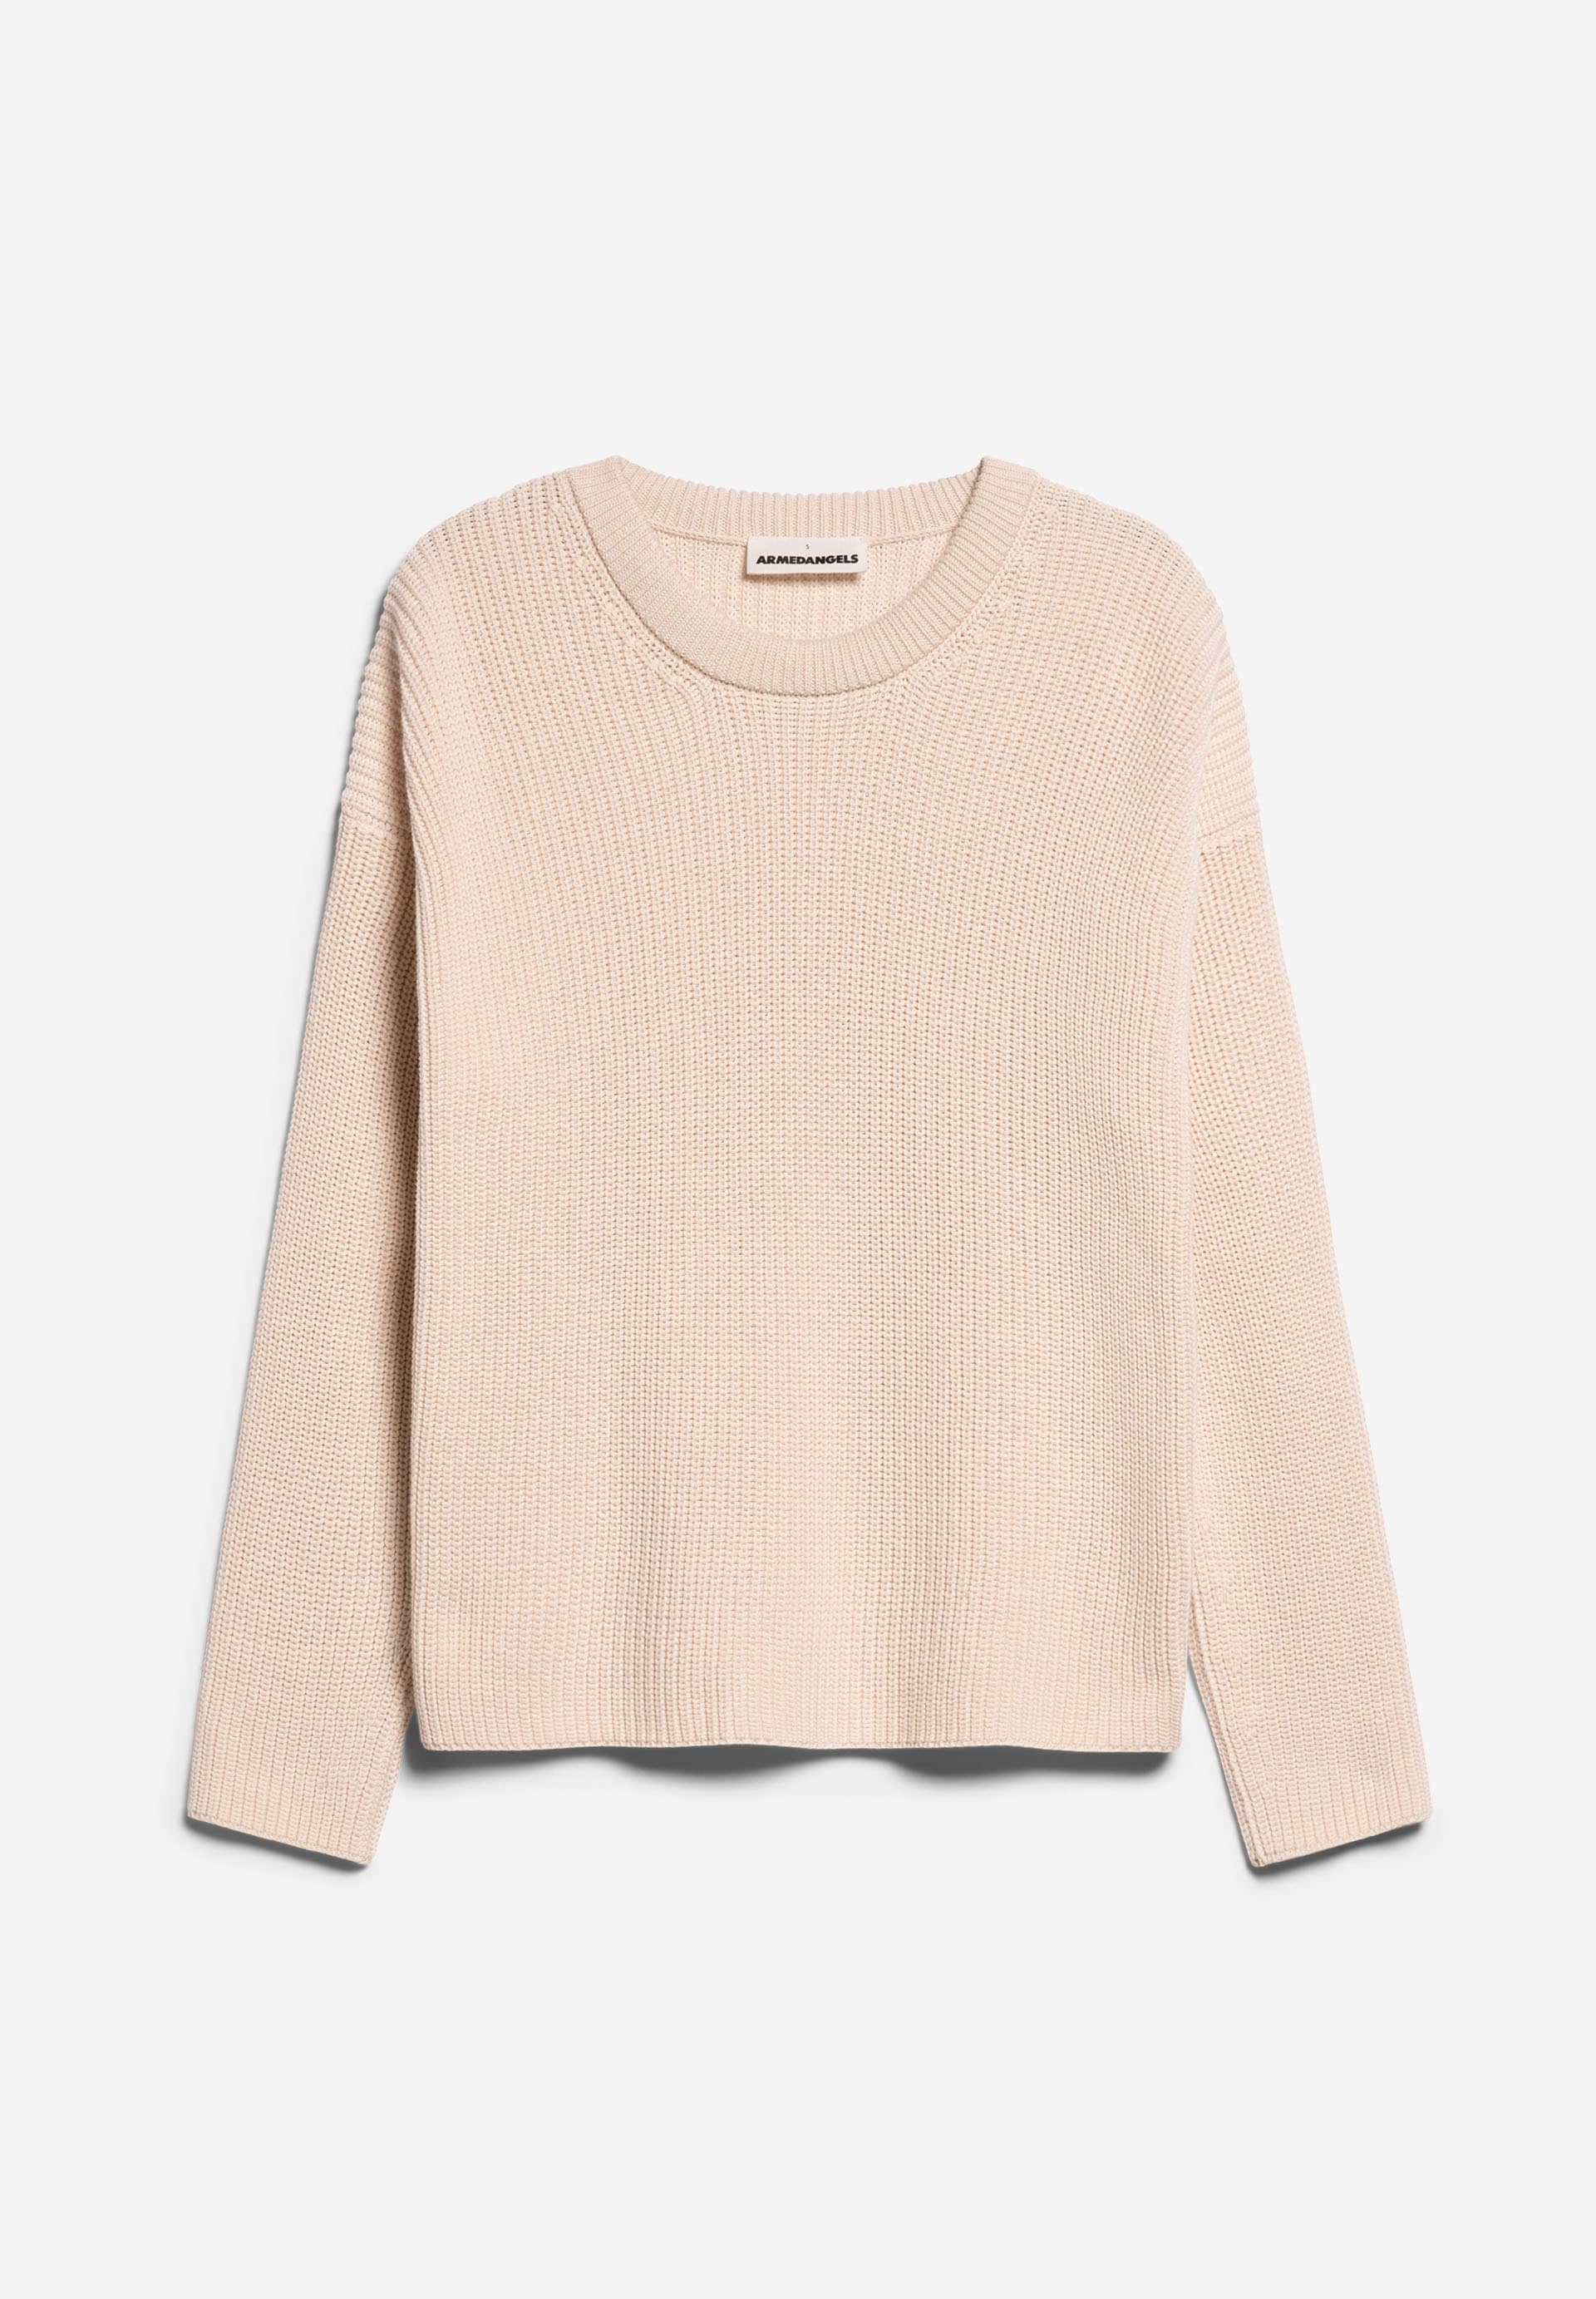 NURIELLAA Knit Sweater Oversized Fit made of Organic Cotton